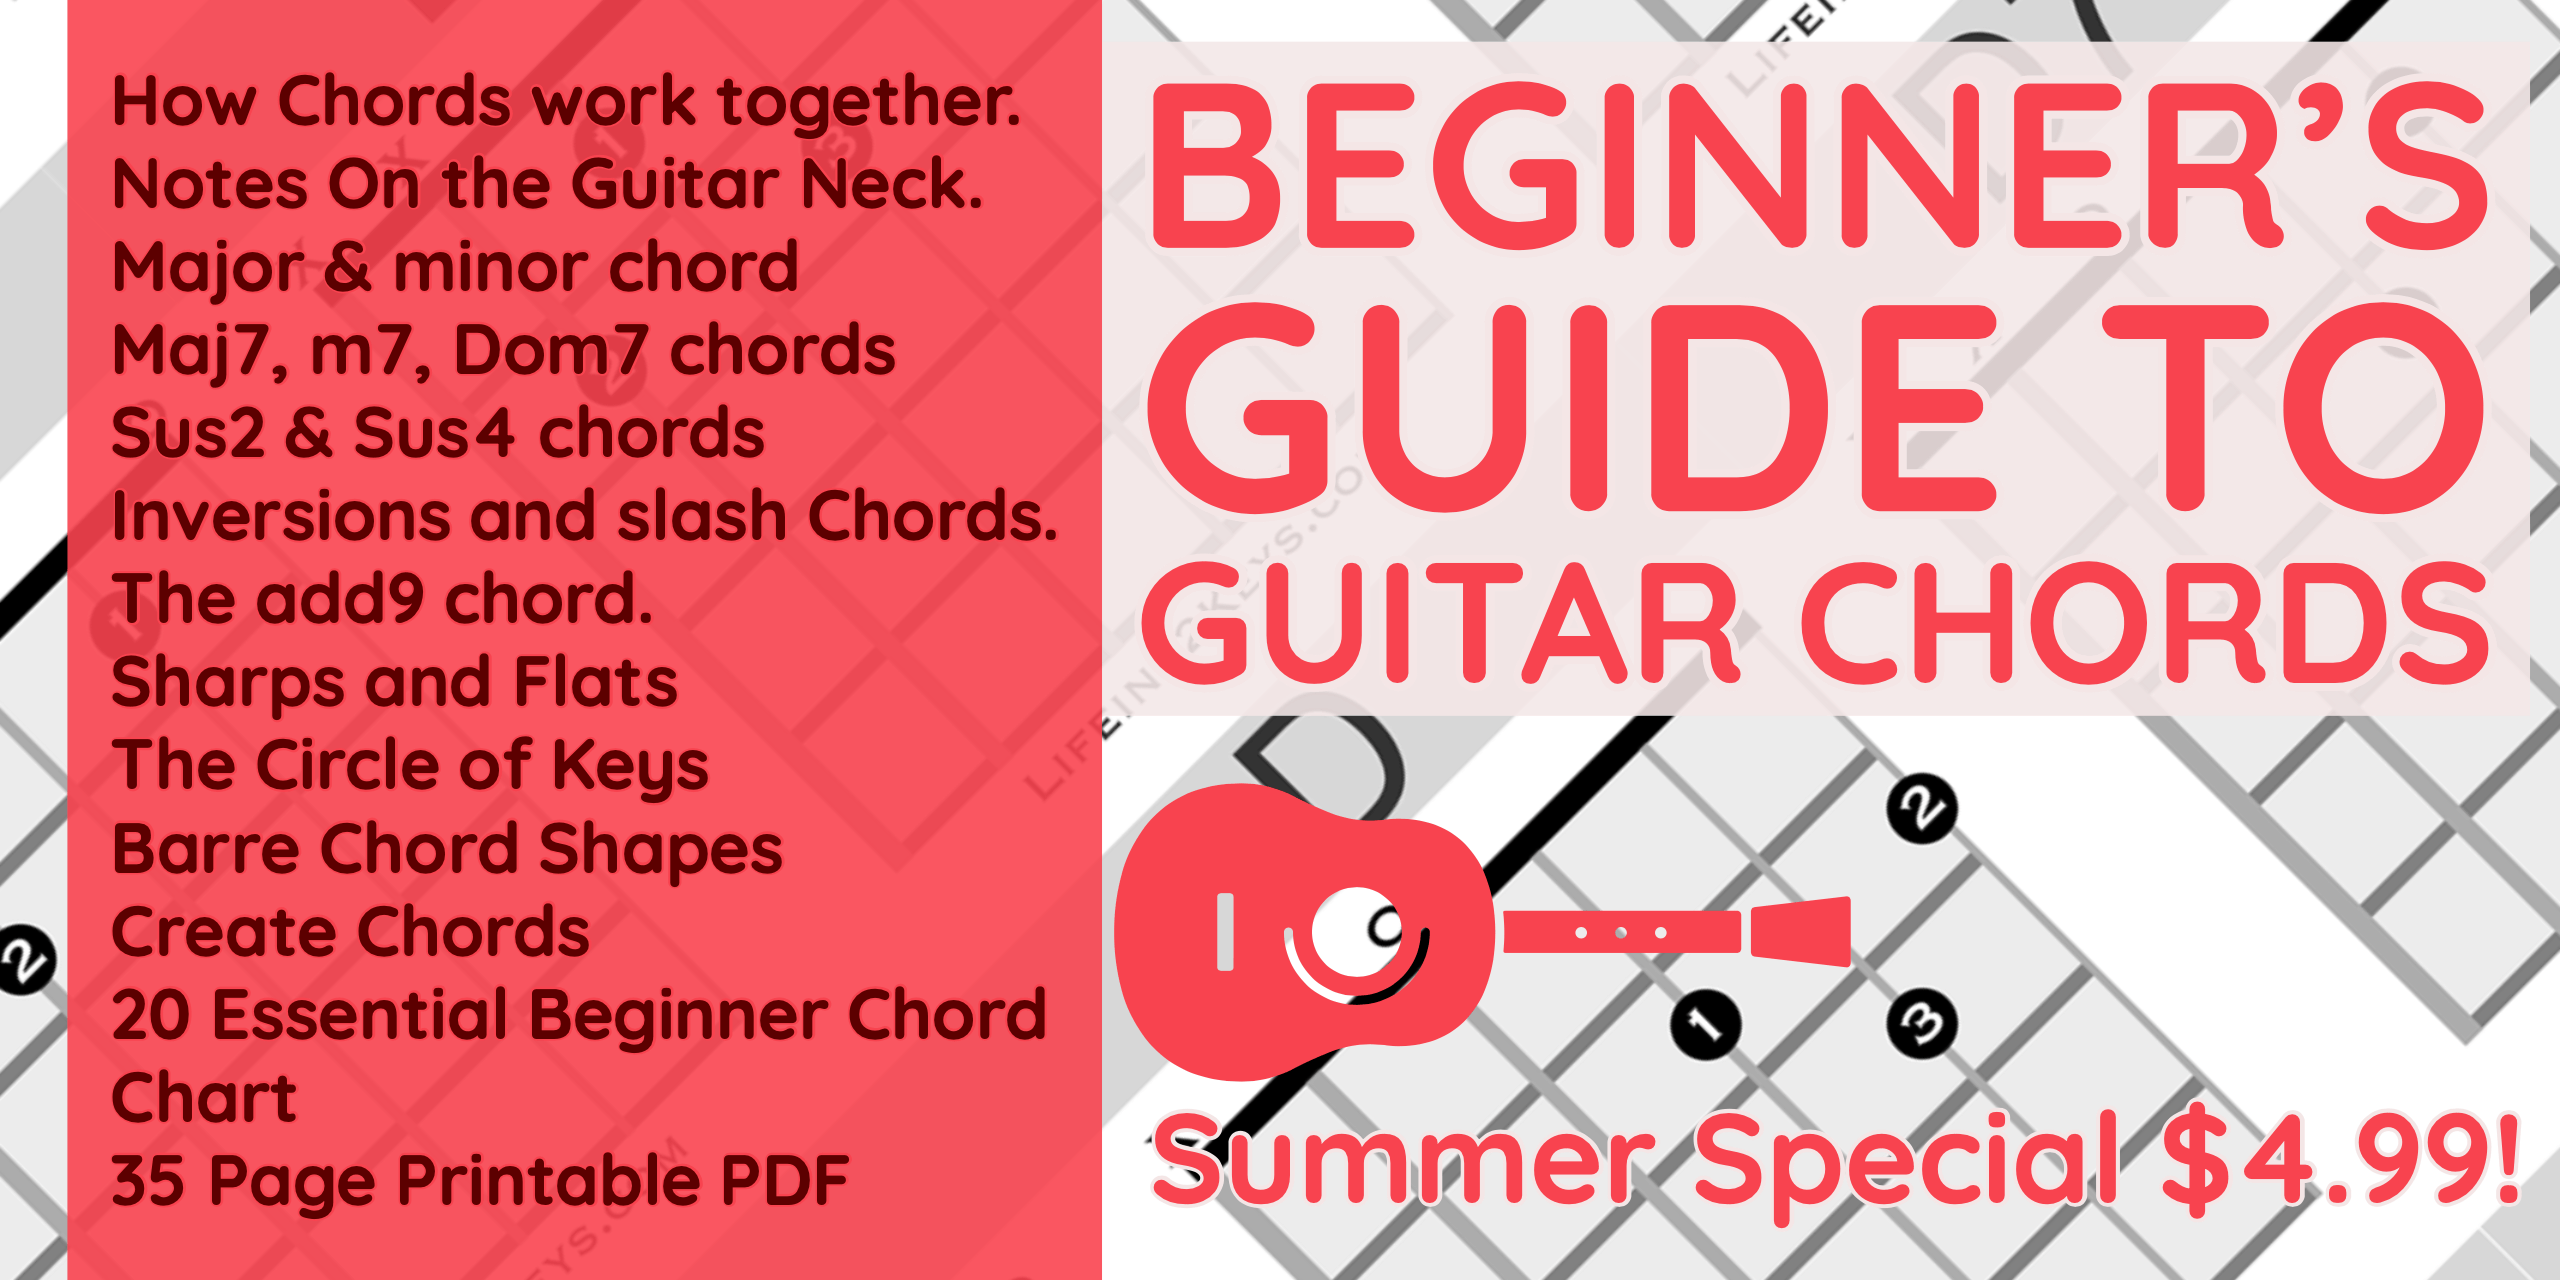 the-beginners-guide-to-guitar-chords-book-life-in-12-keys